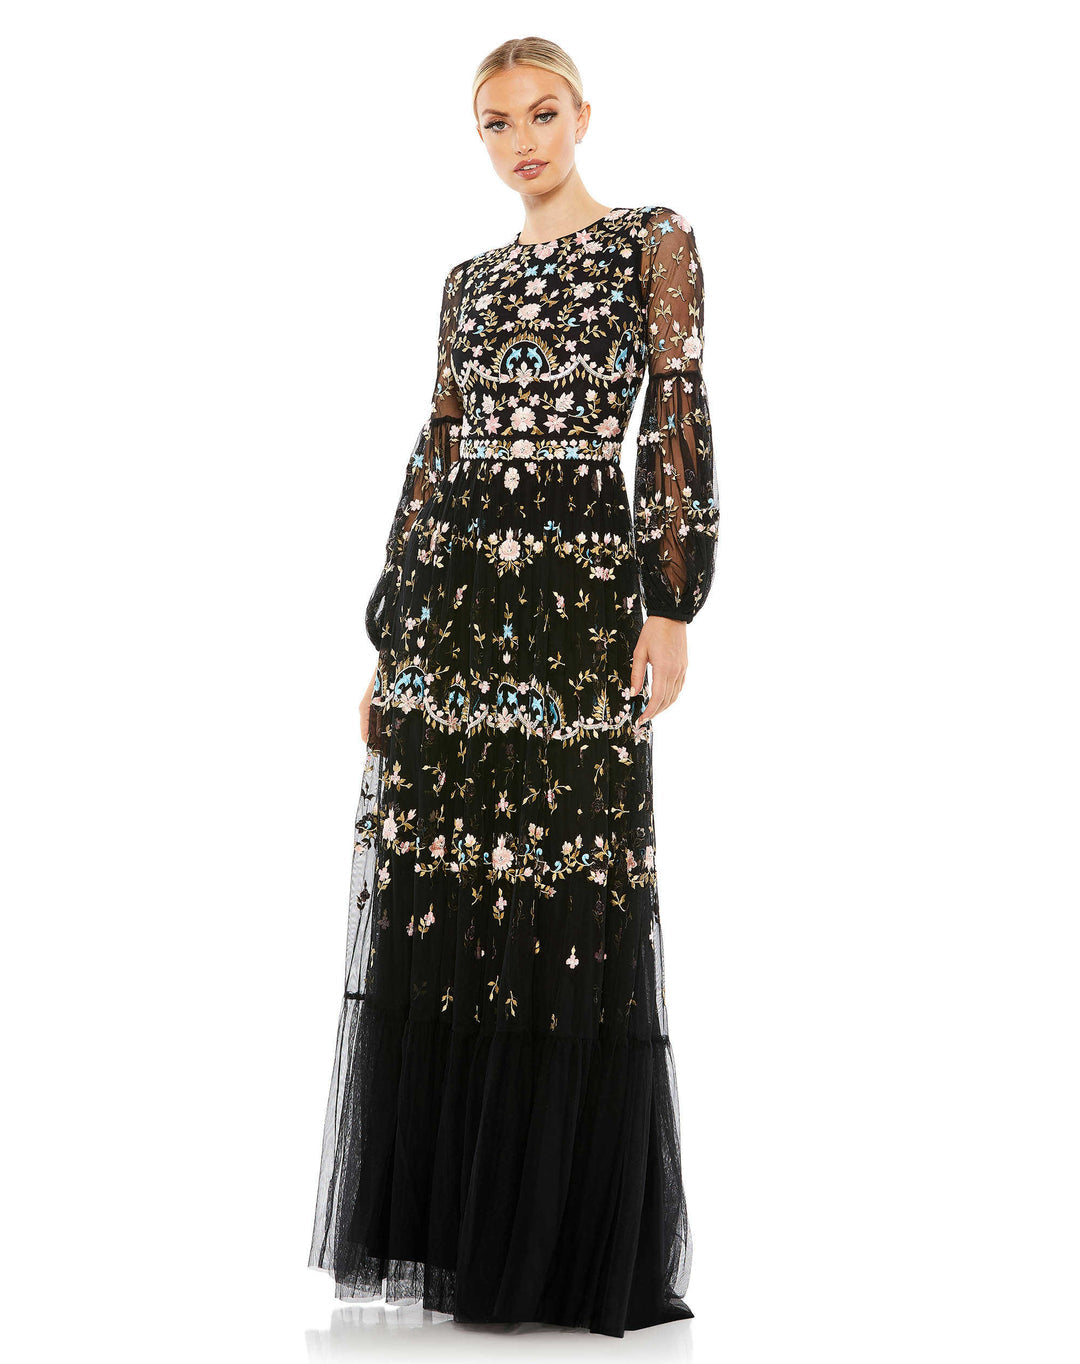 EMBROIDERED BLOUSON SLEEVE GOWN, mac duggal, Style #35111, black front view